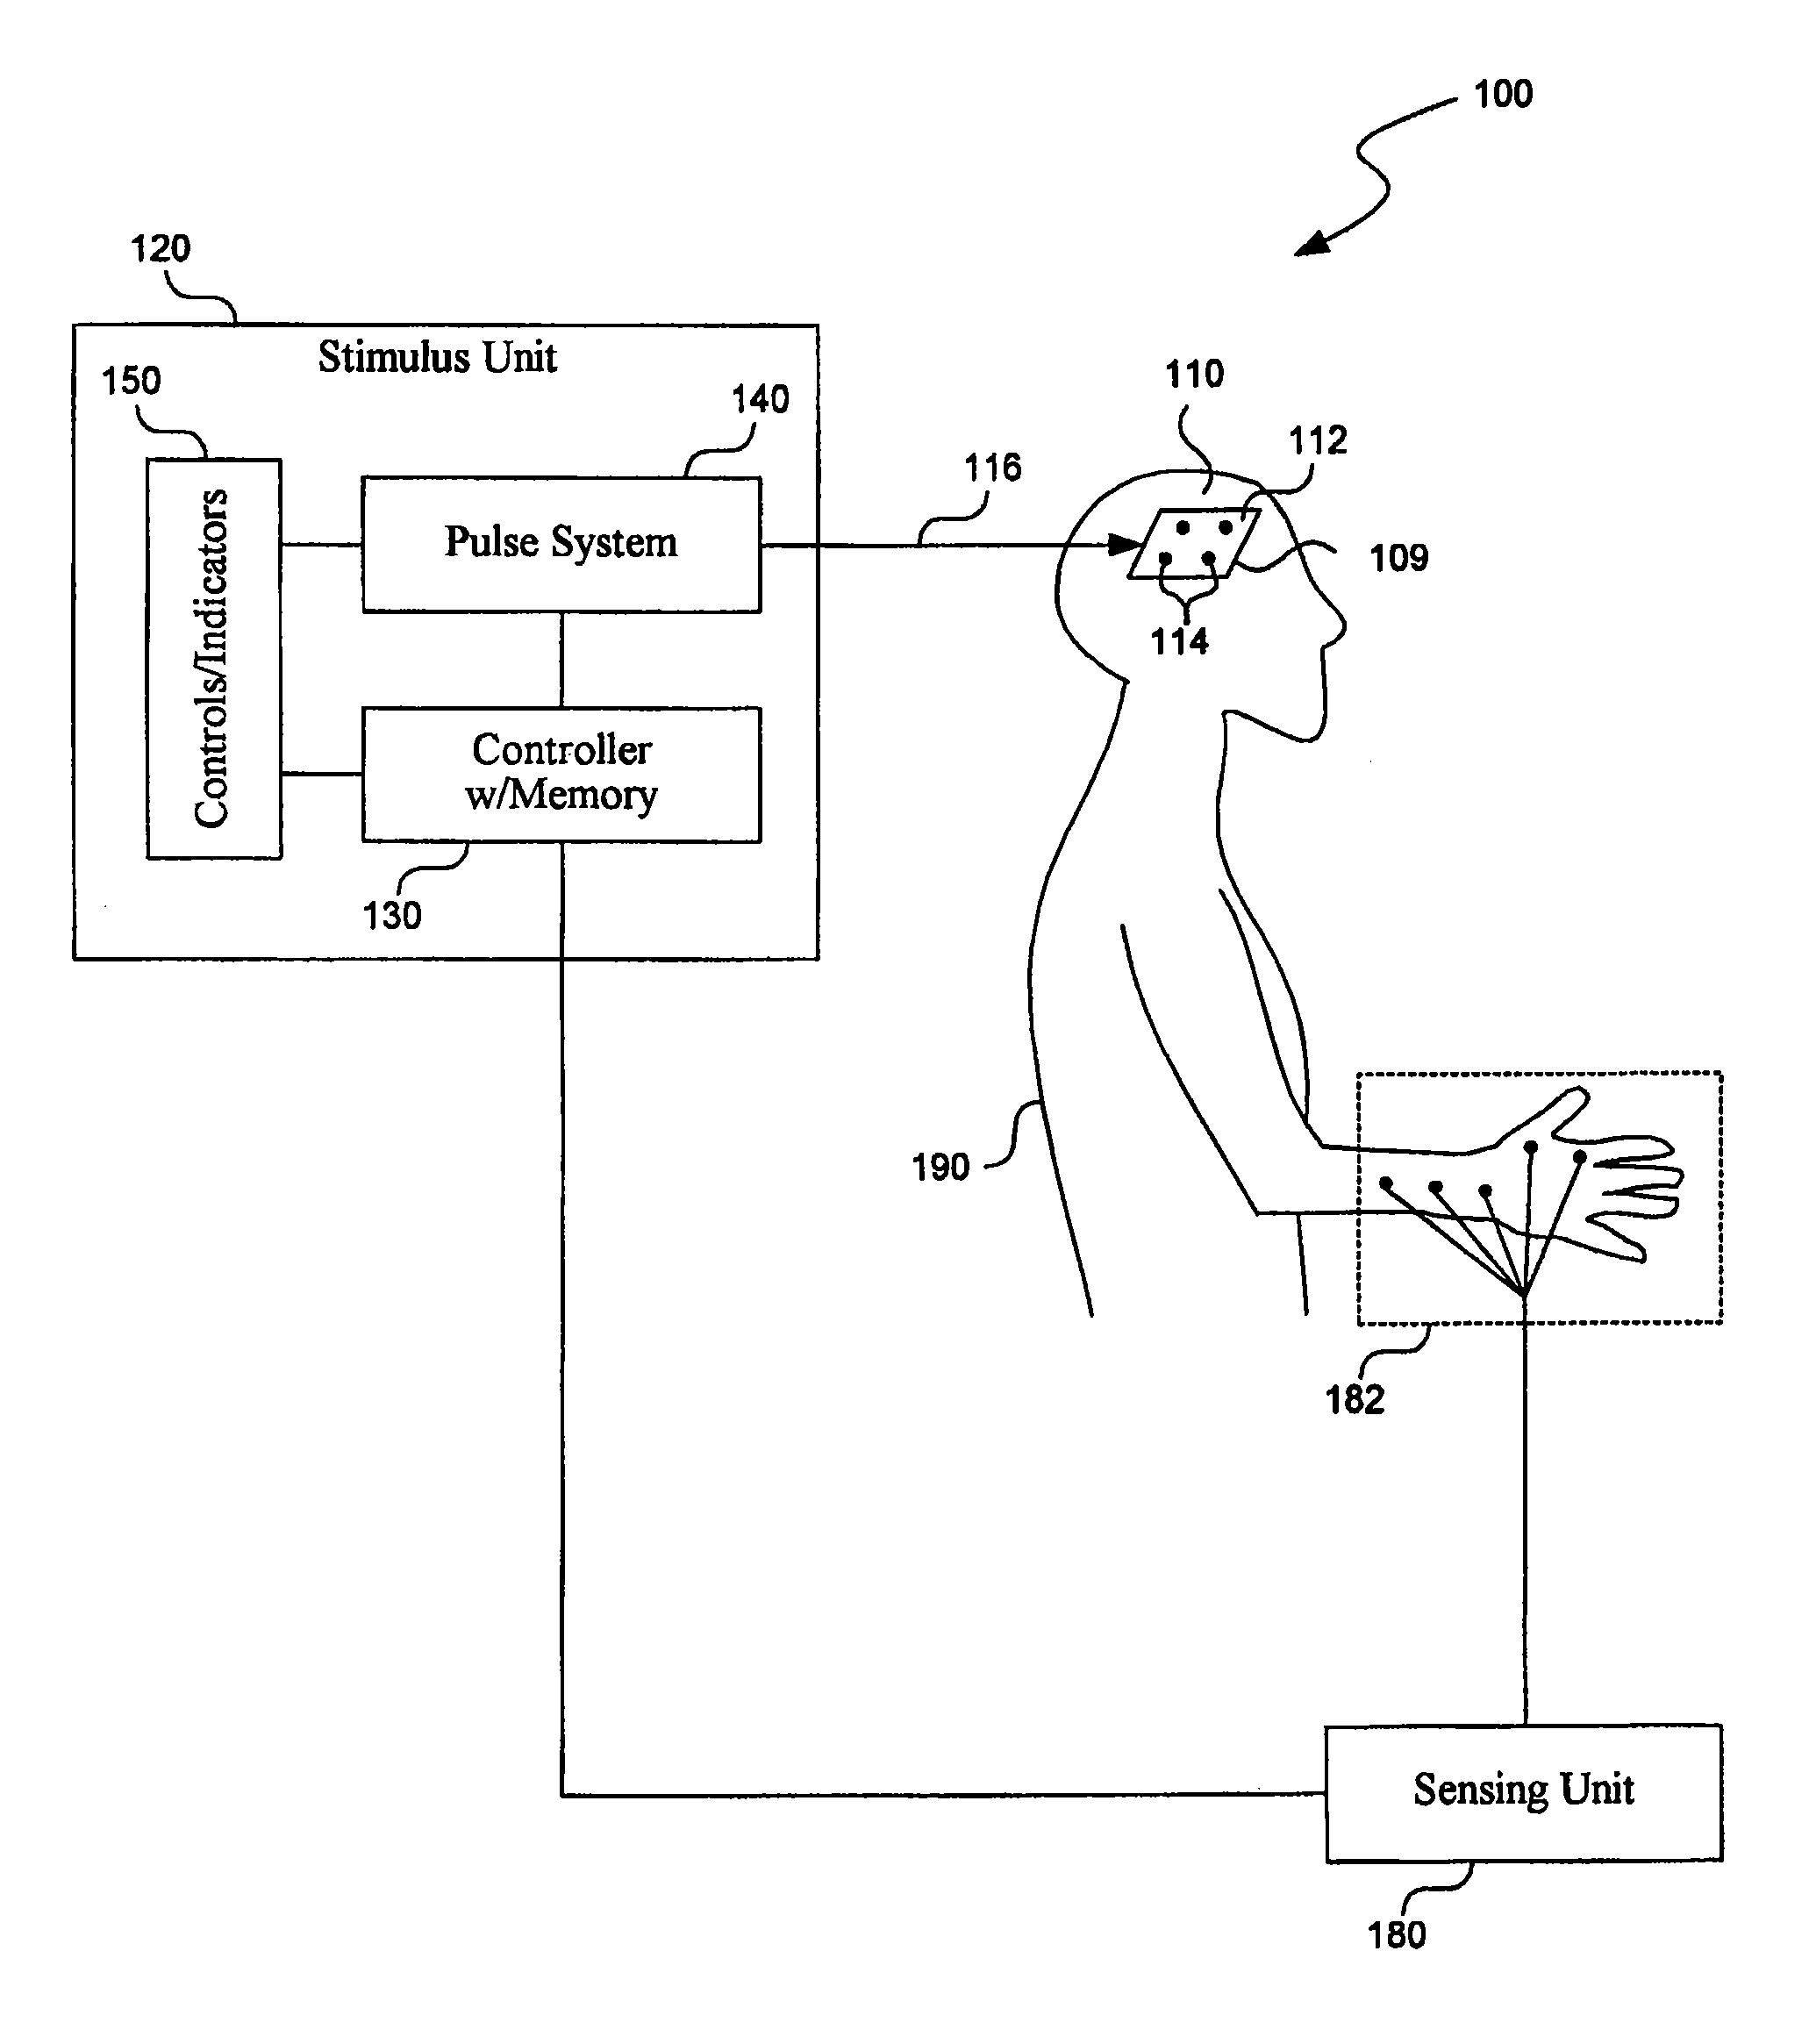 Systems and methods for reducing the likelihood of inducing collateral neural activity during neural stimulation threshold test procedures